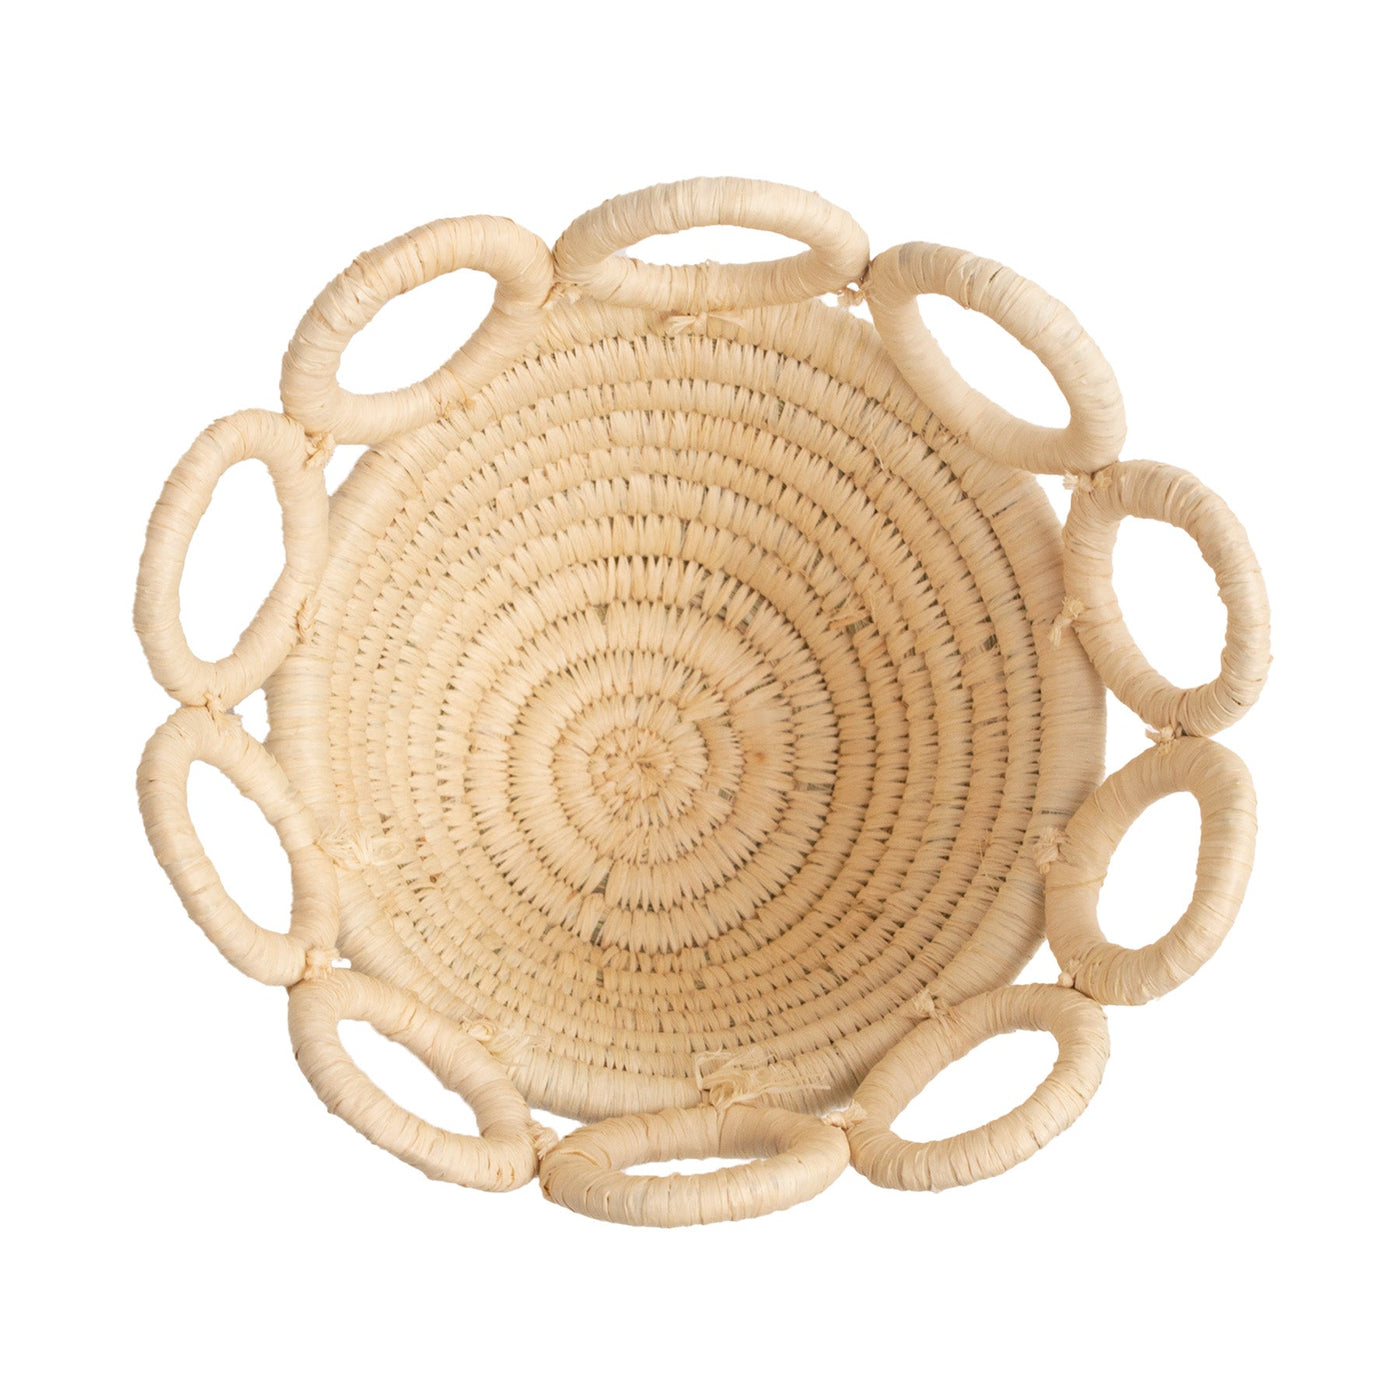 Handmade African artisan home decor from Kazi All Across Africa eco-friendly sustainable fair-trade goods